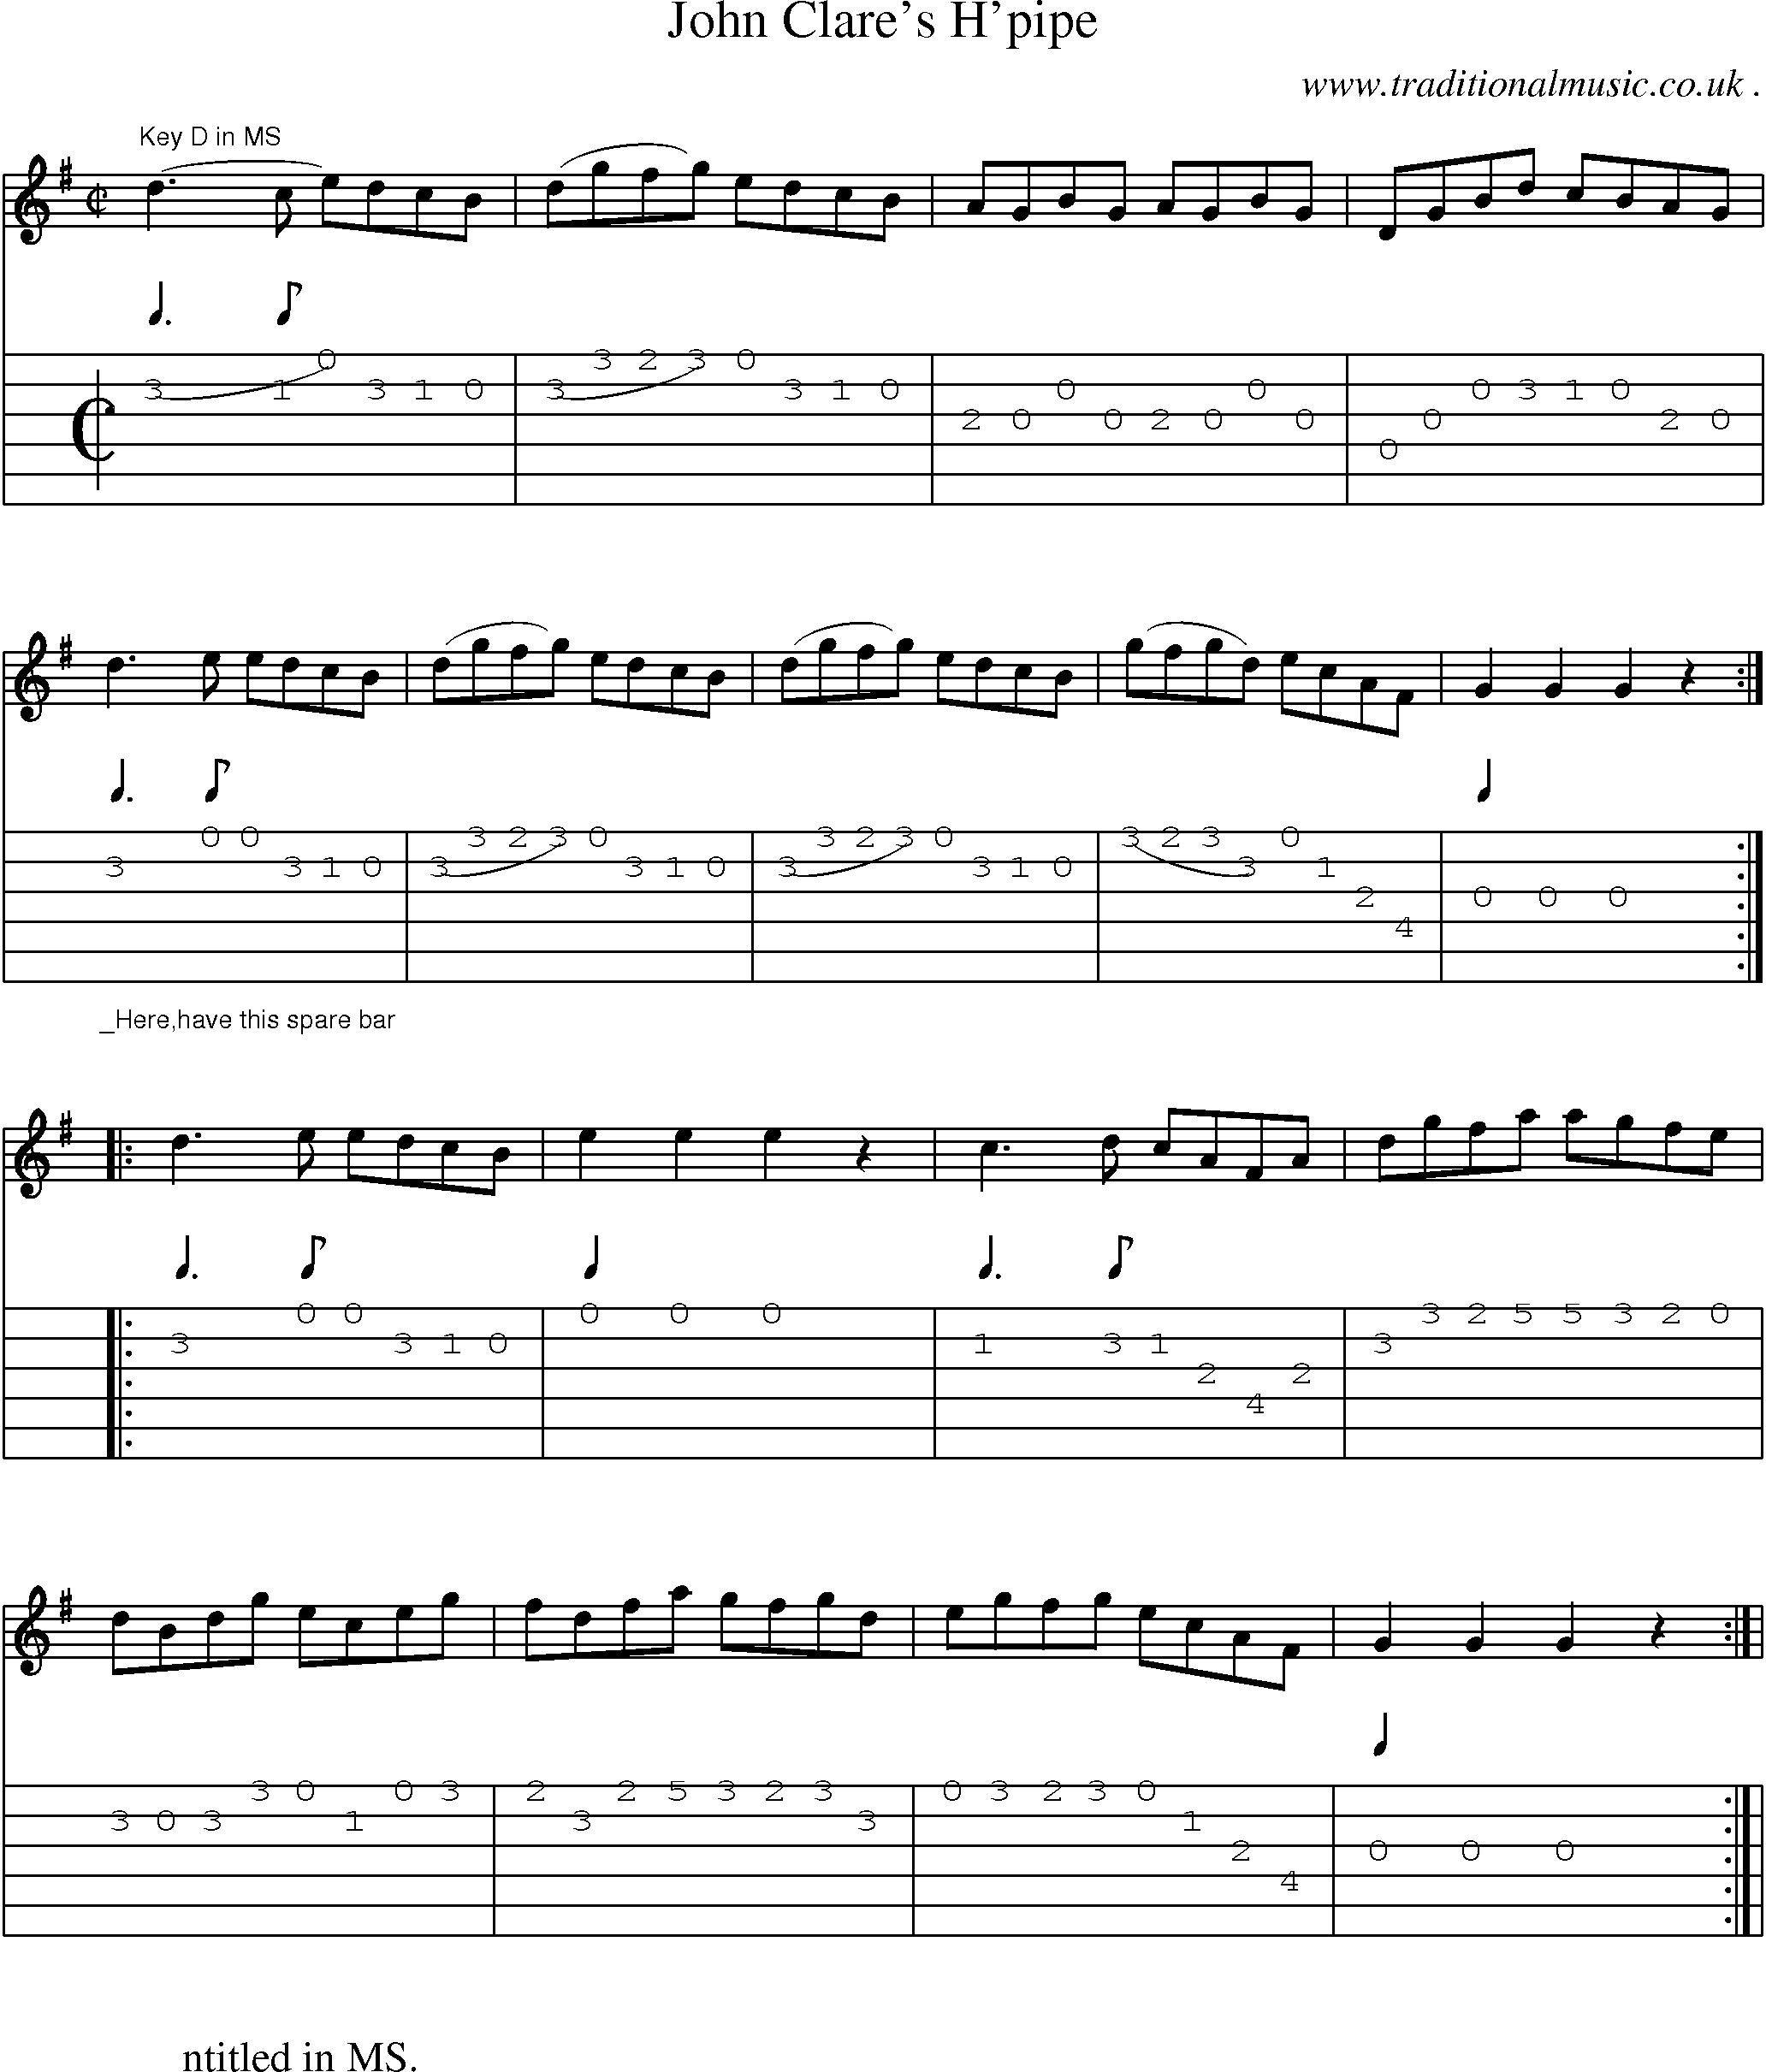 Sheet-Music and Guitar Tabs for John Clares Hpipe